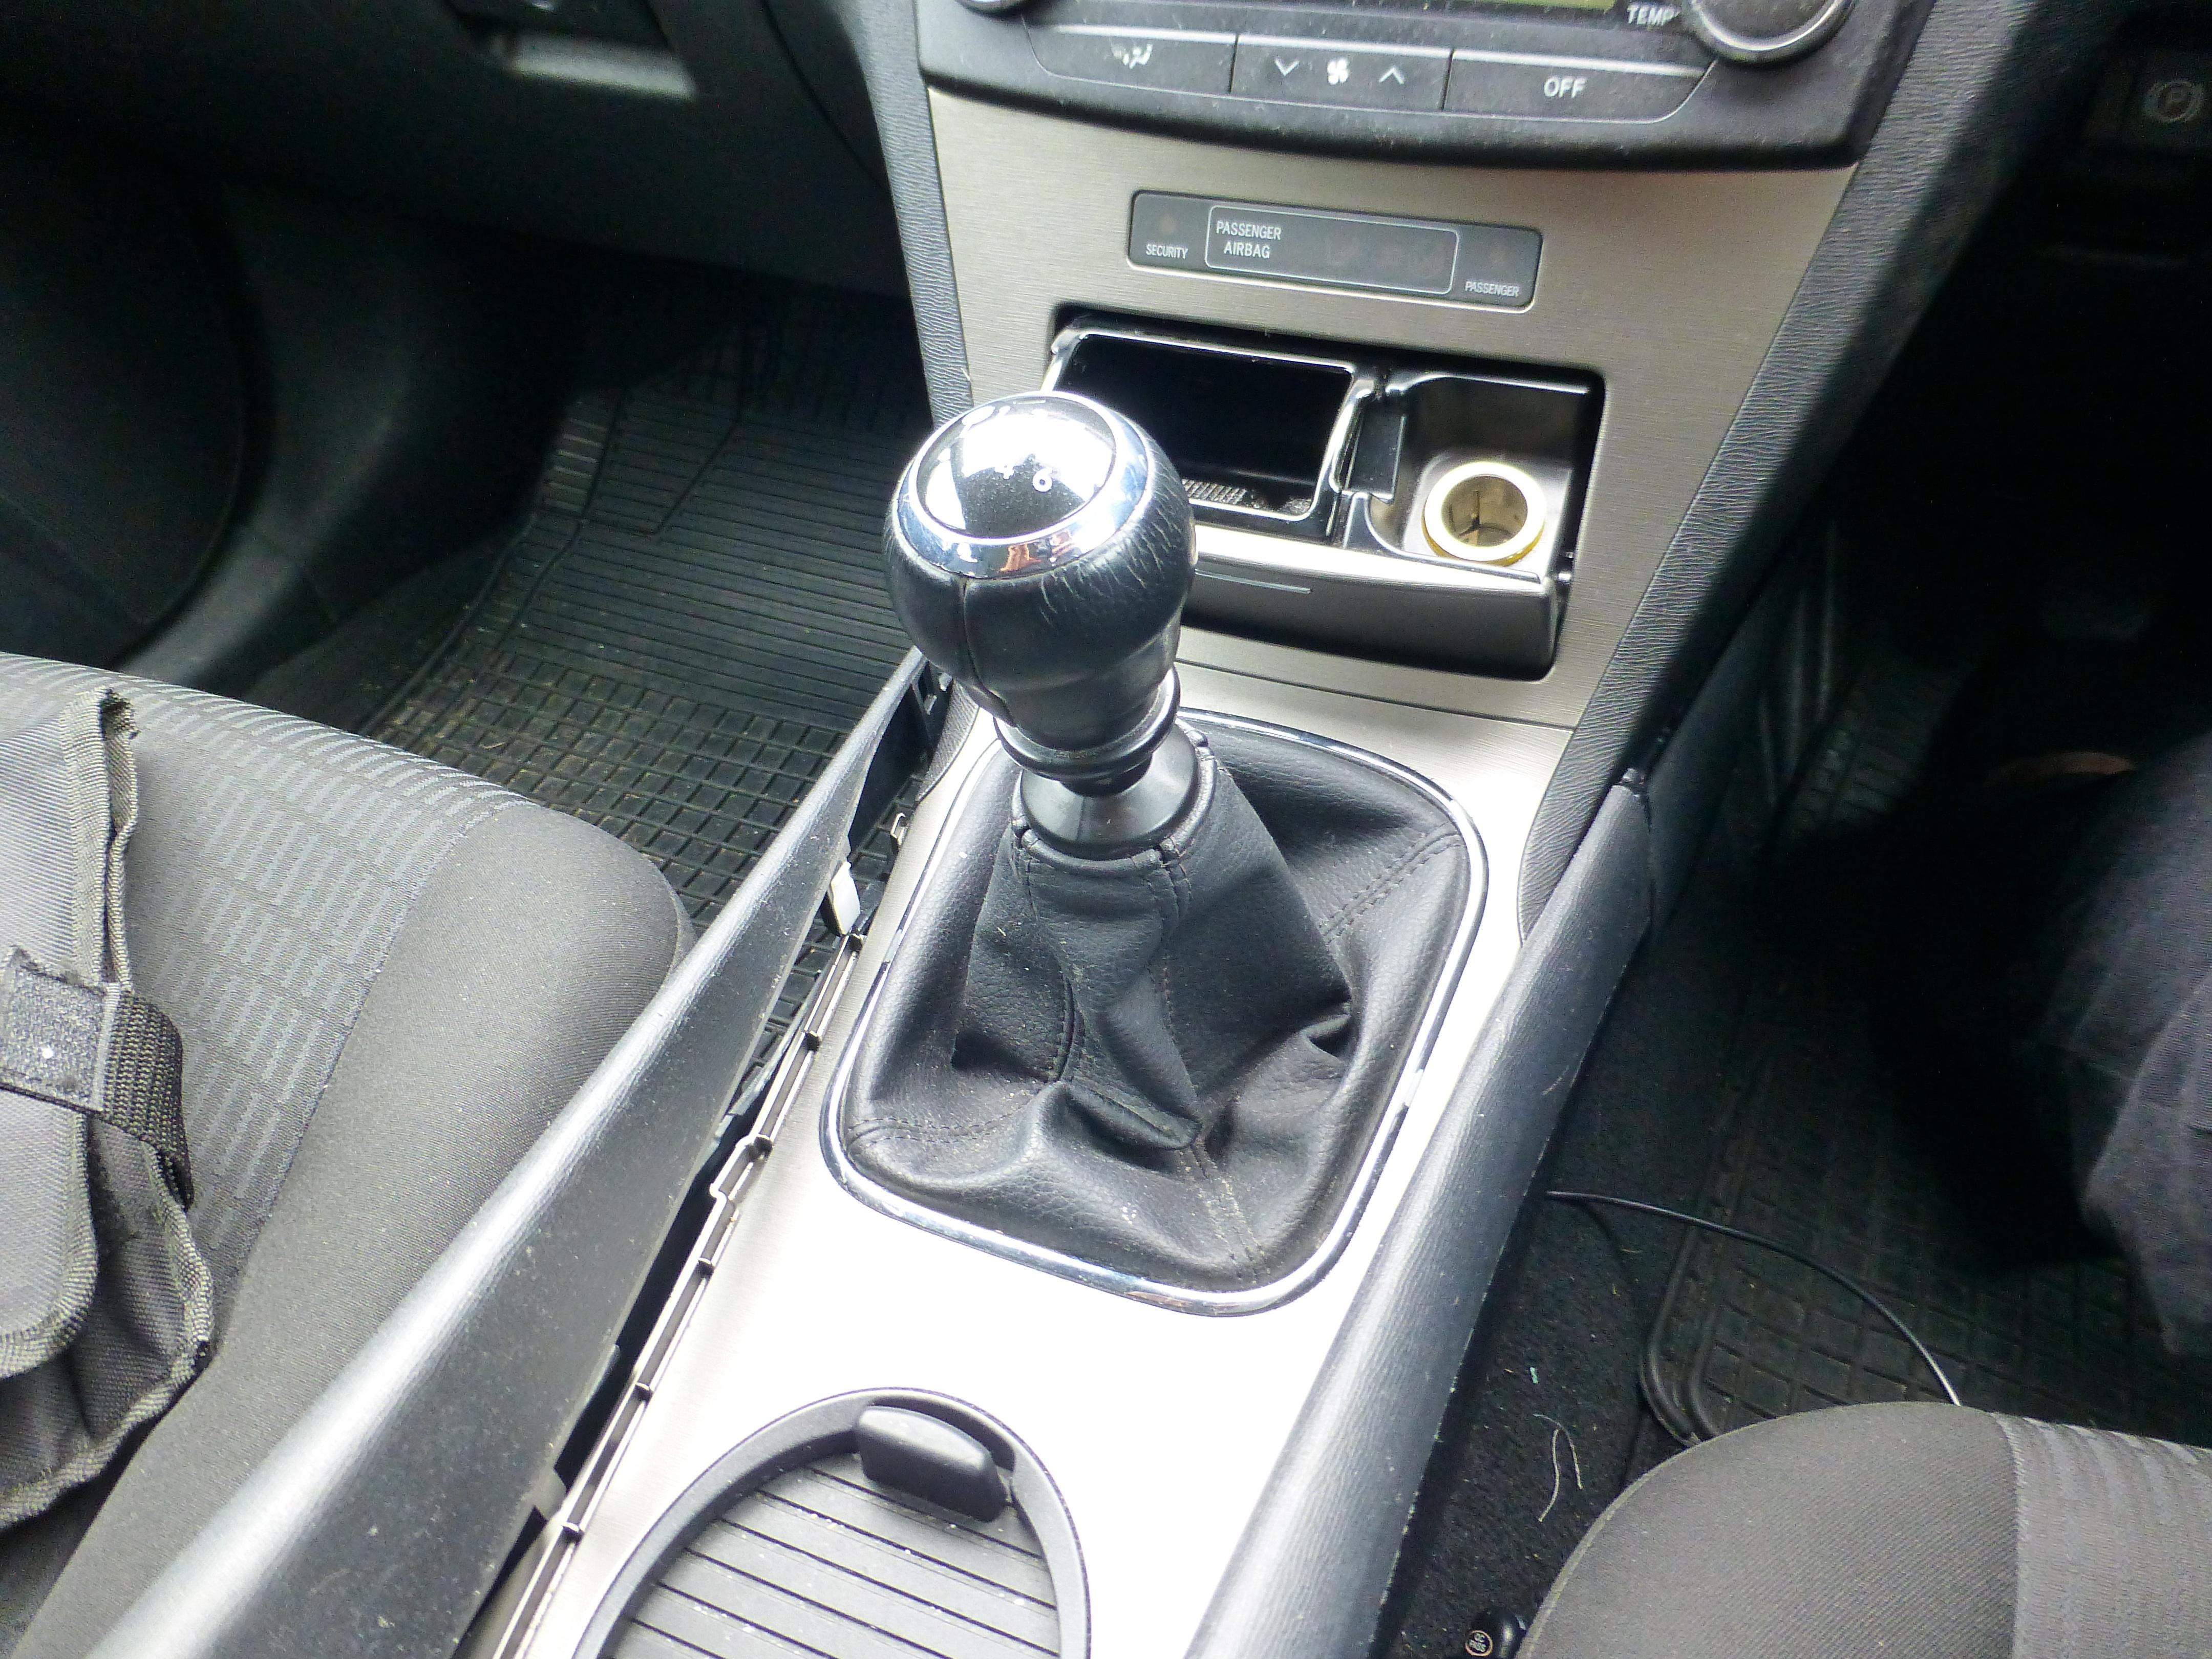 where does the hole in the avensis ashtray go? - Avensis Club - Toyota  Owners Club - Toyota Forum